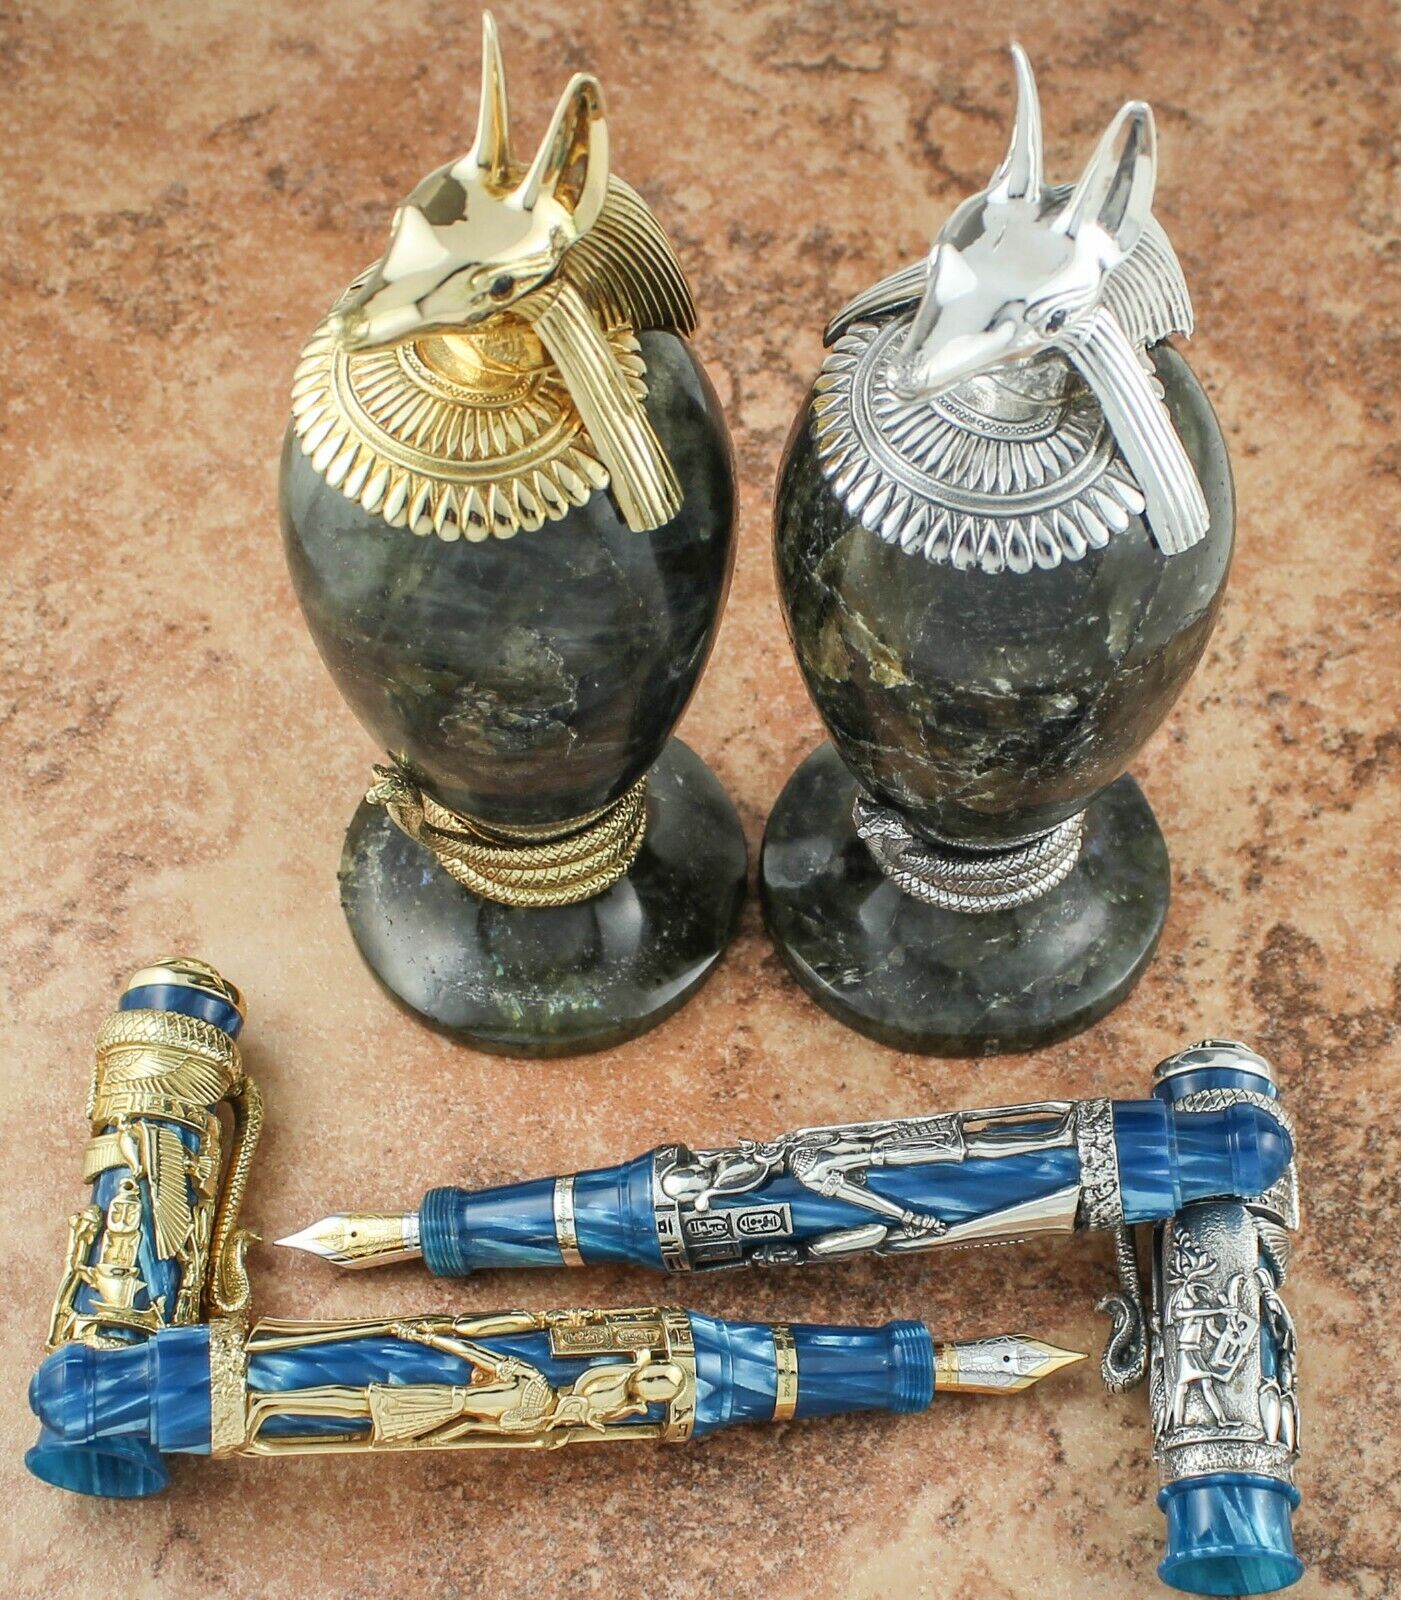 Montegrappa 1996 Luxor LE Gold FP & Silver FP Set with Inkwells - Matching #8